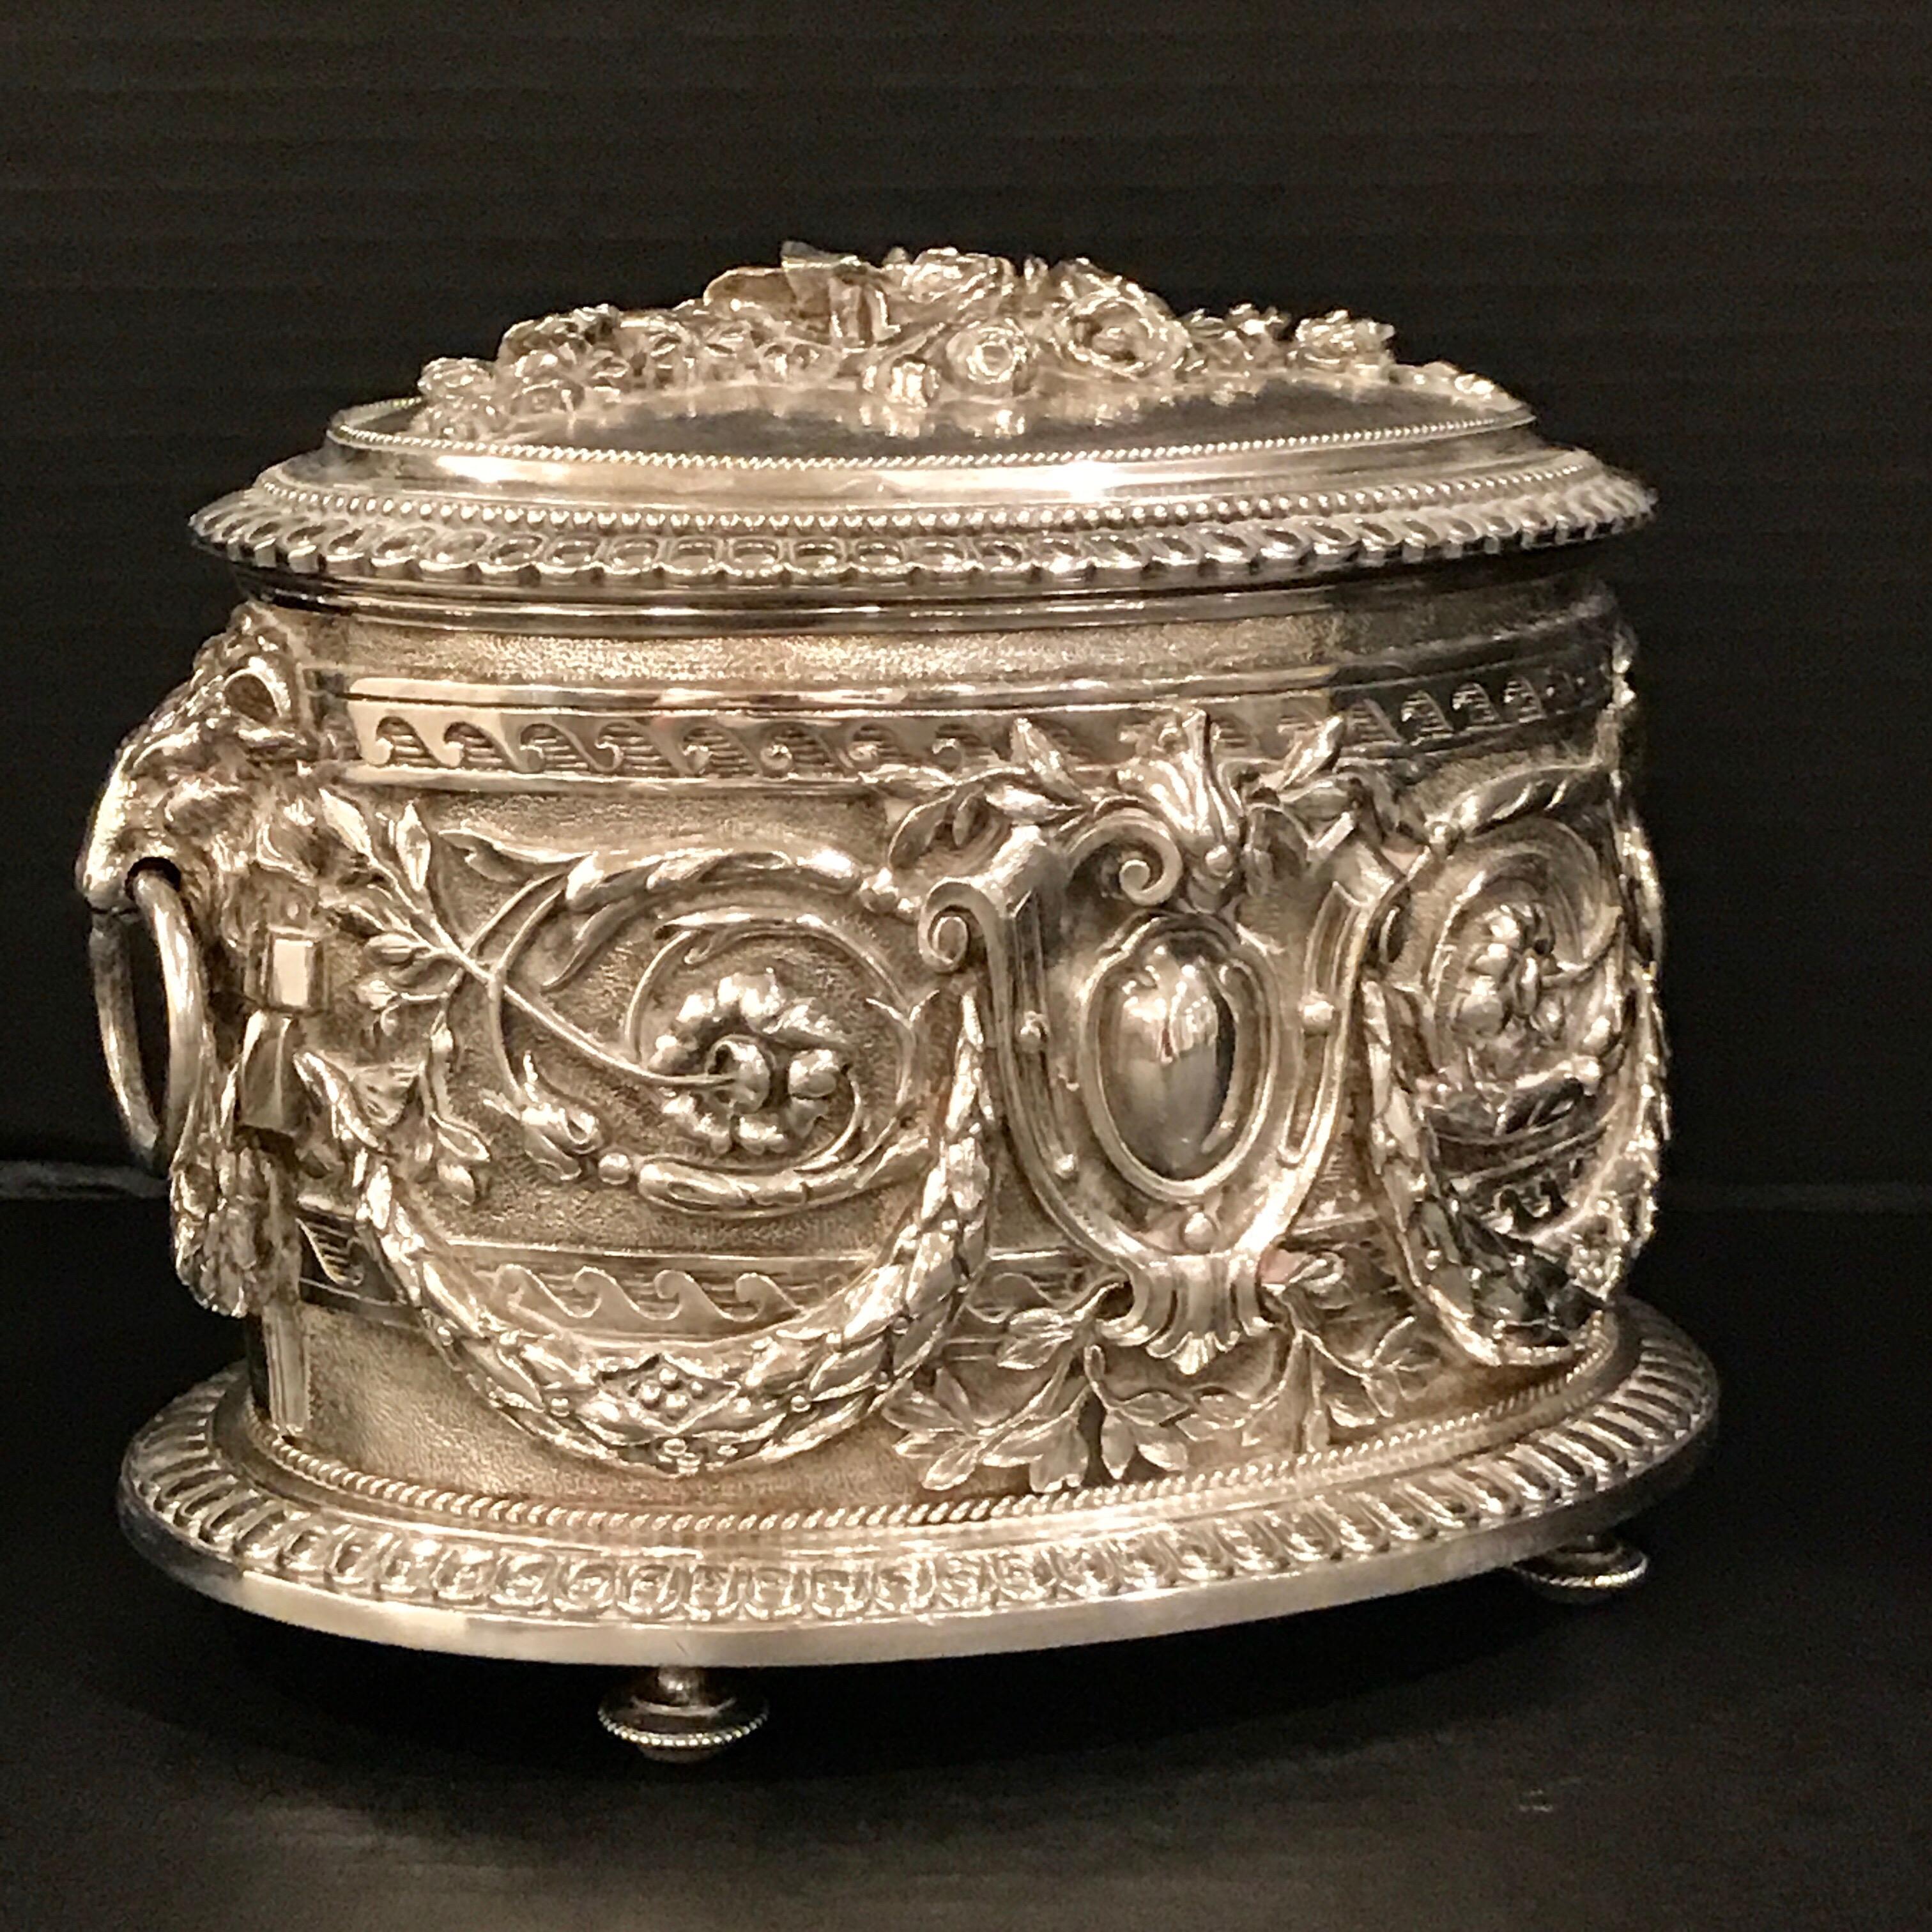 19th Century English Silverplated Ornate Table Box by Hukin and Heath